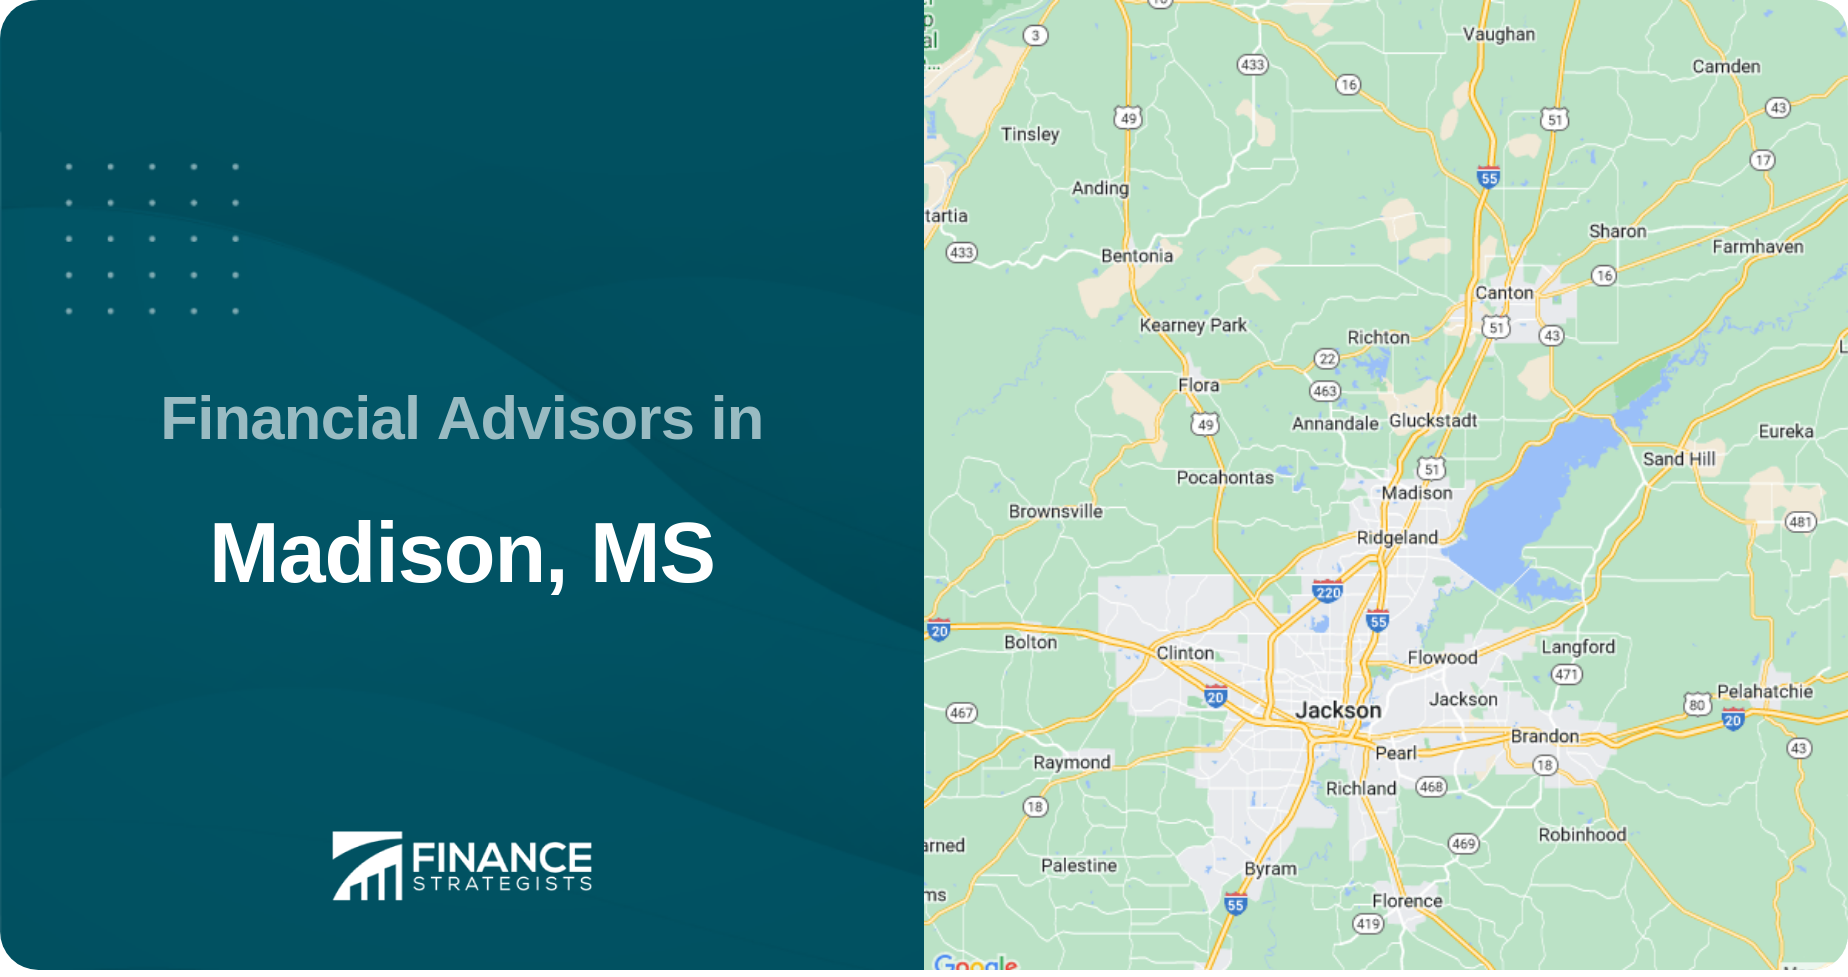 Financial Advisors in Madison, MS